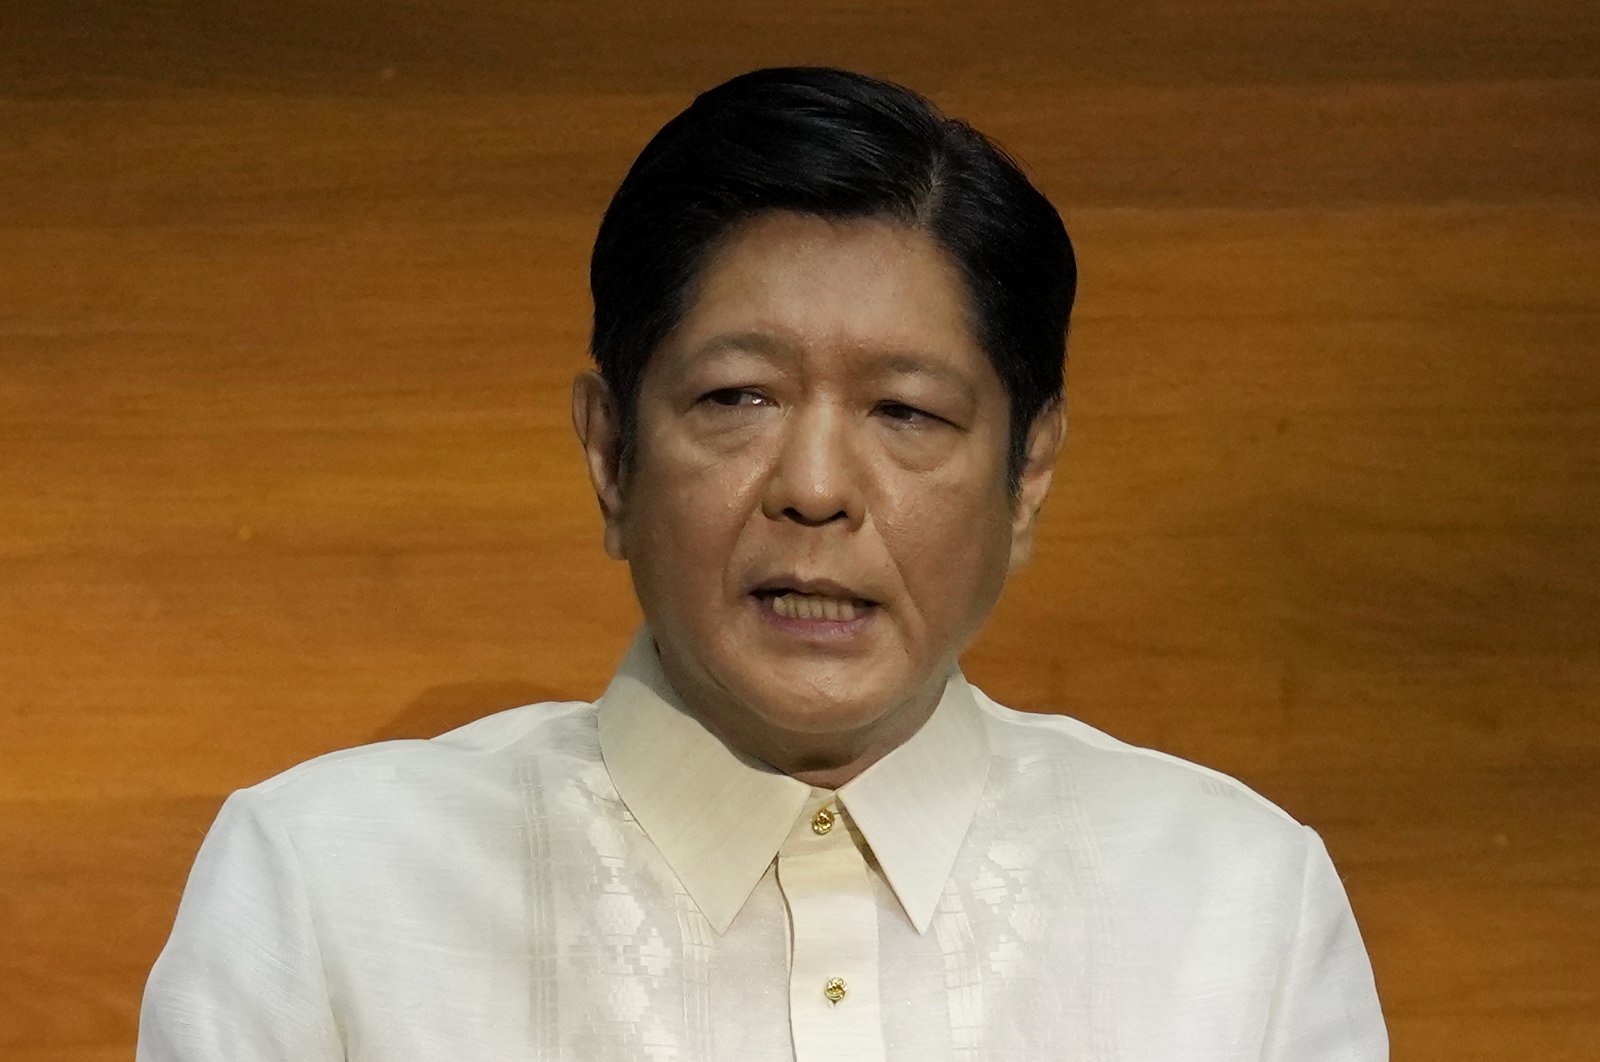 Philippine President Ferdinand Marcos Jr. delivers his first state of the nation address, Quezon city, Philippines, July 25, 2022. (AP Photo)